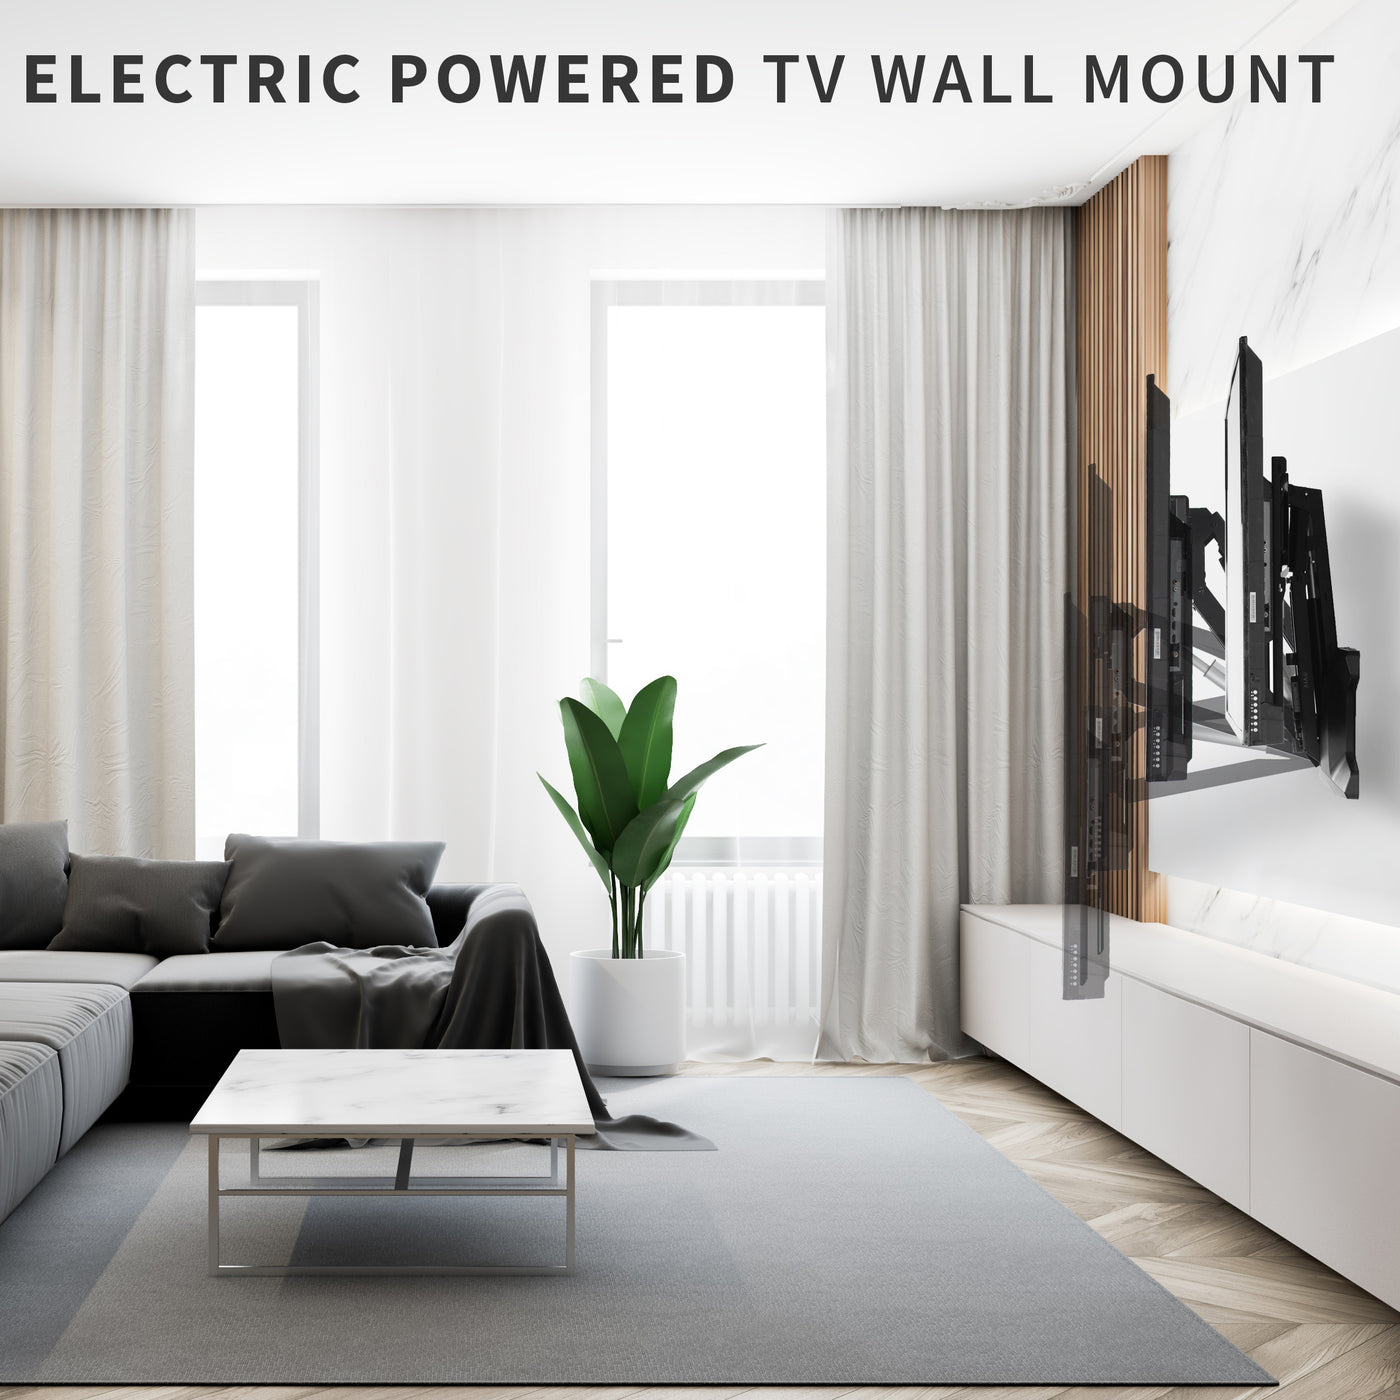 Lower or elevate your TV for the most comfortable viewing angles from wherever you are.